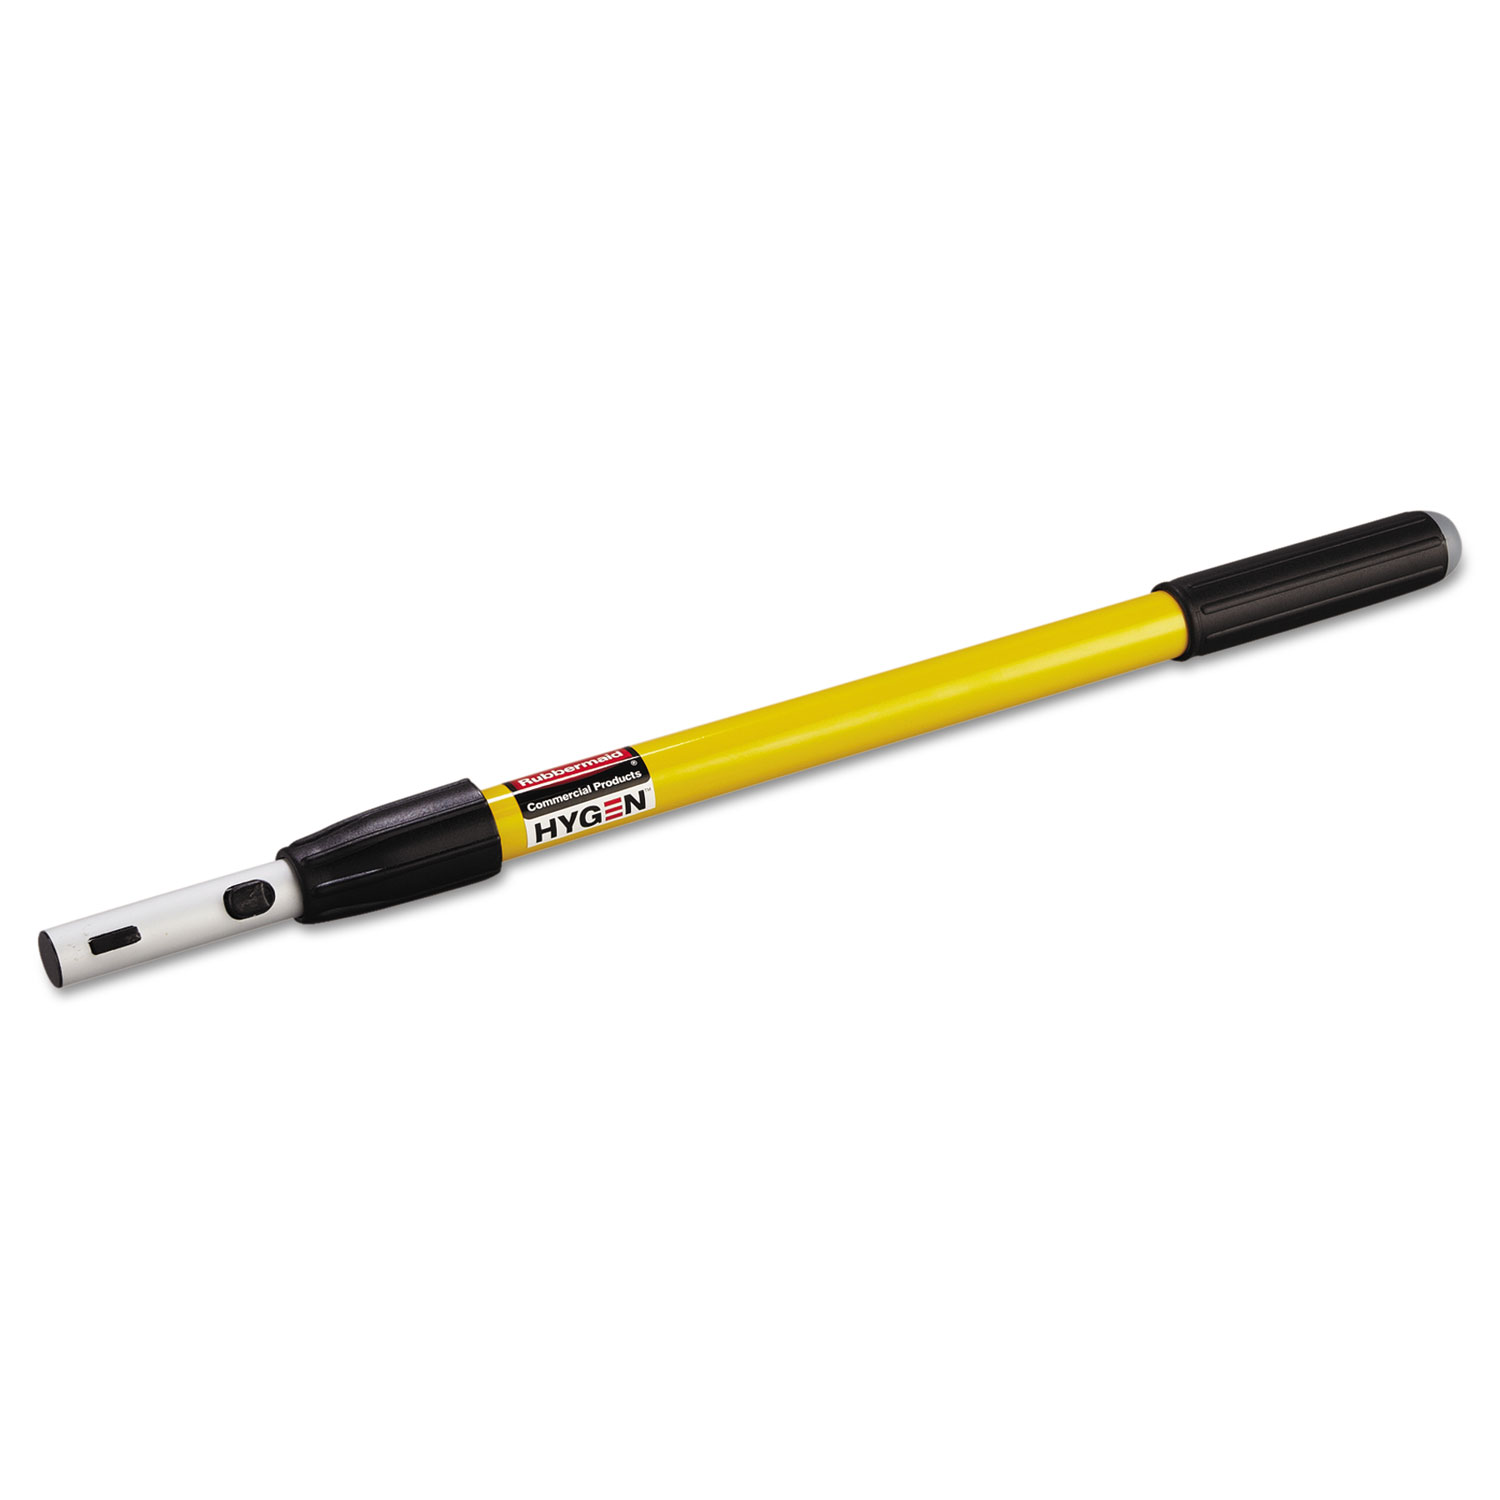  Rubbermaid Commercial HYGEN FGQ74500YL00 HYGEN Quick-Connect Extension Handle, 20-40, Yellow/Black (RCPQ745) 